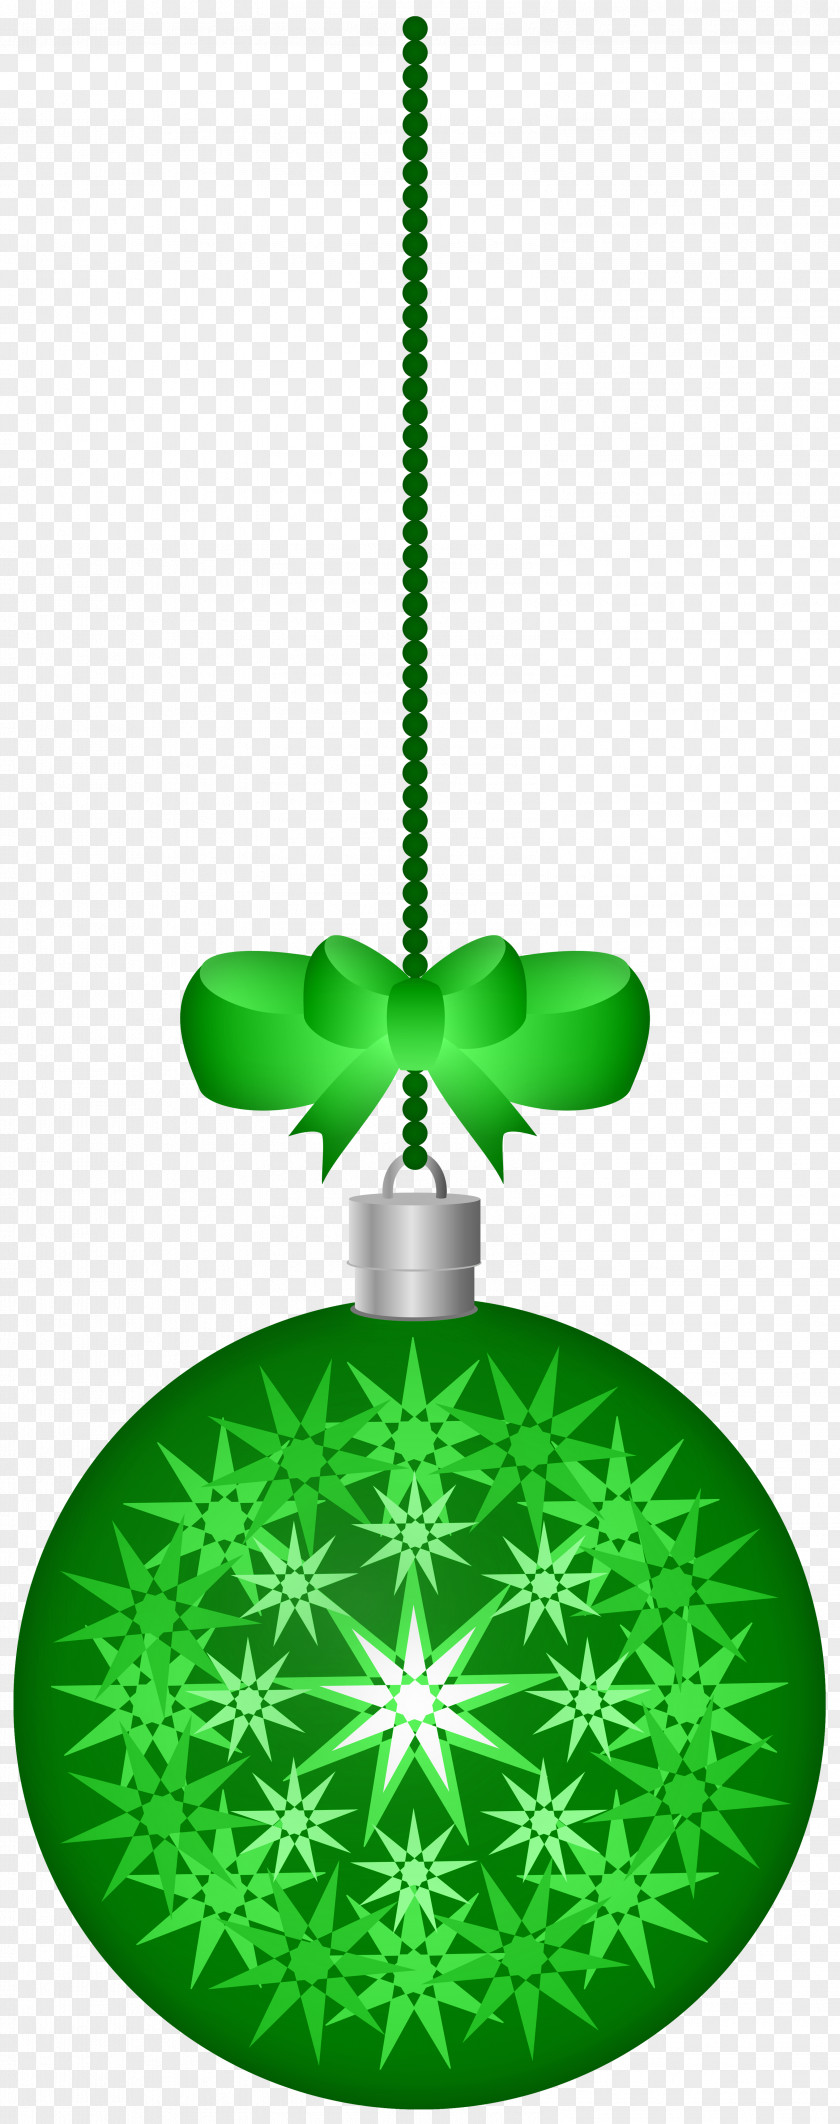 Lucky Symbols Christmas Ornament Decoration 25 December PNG